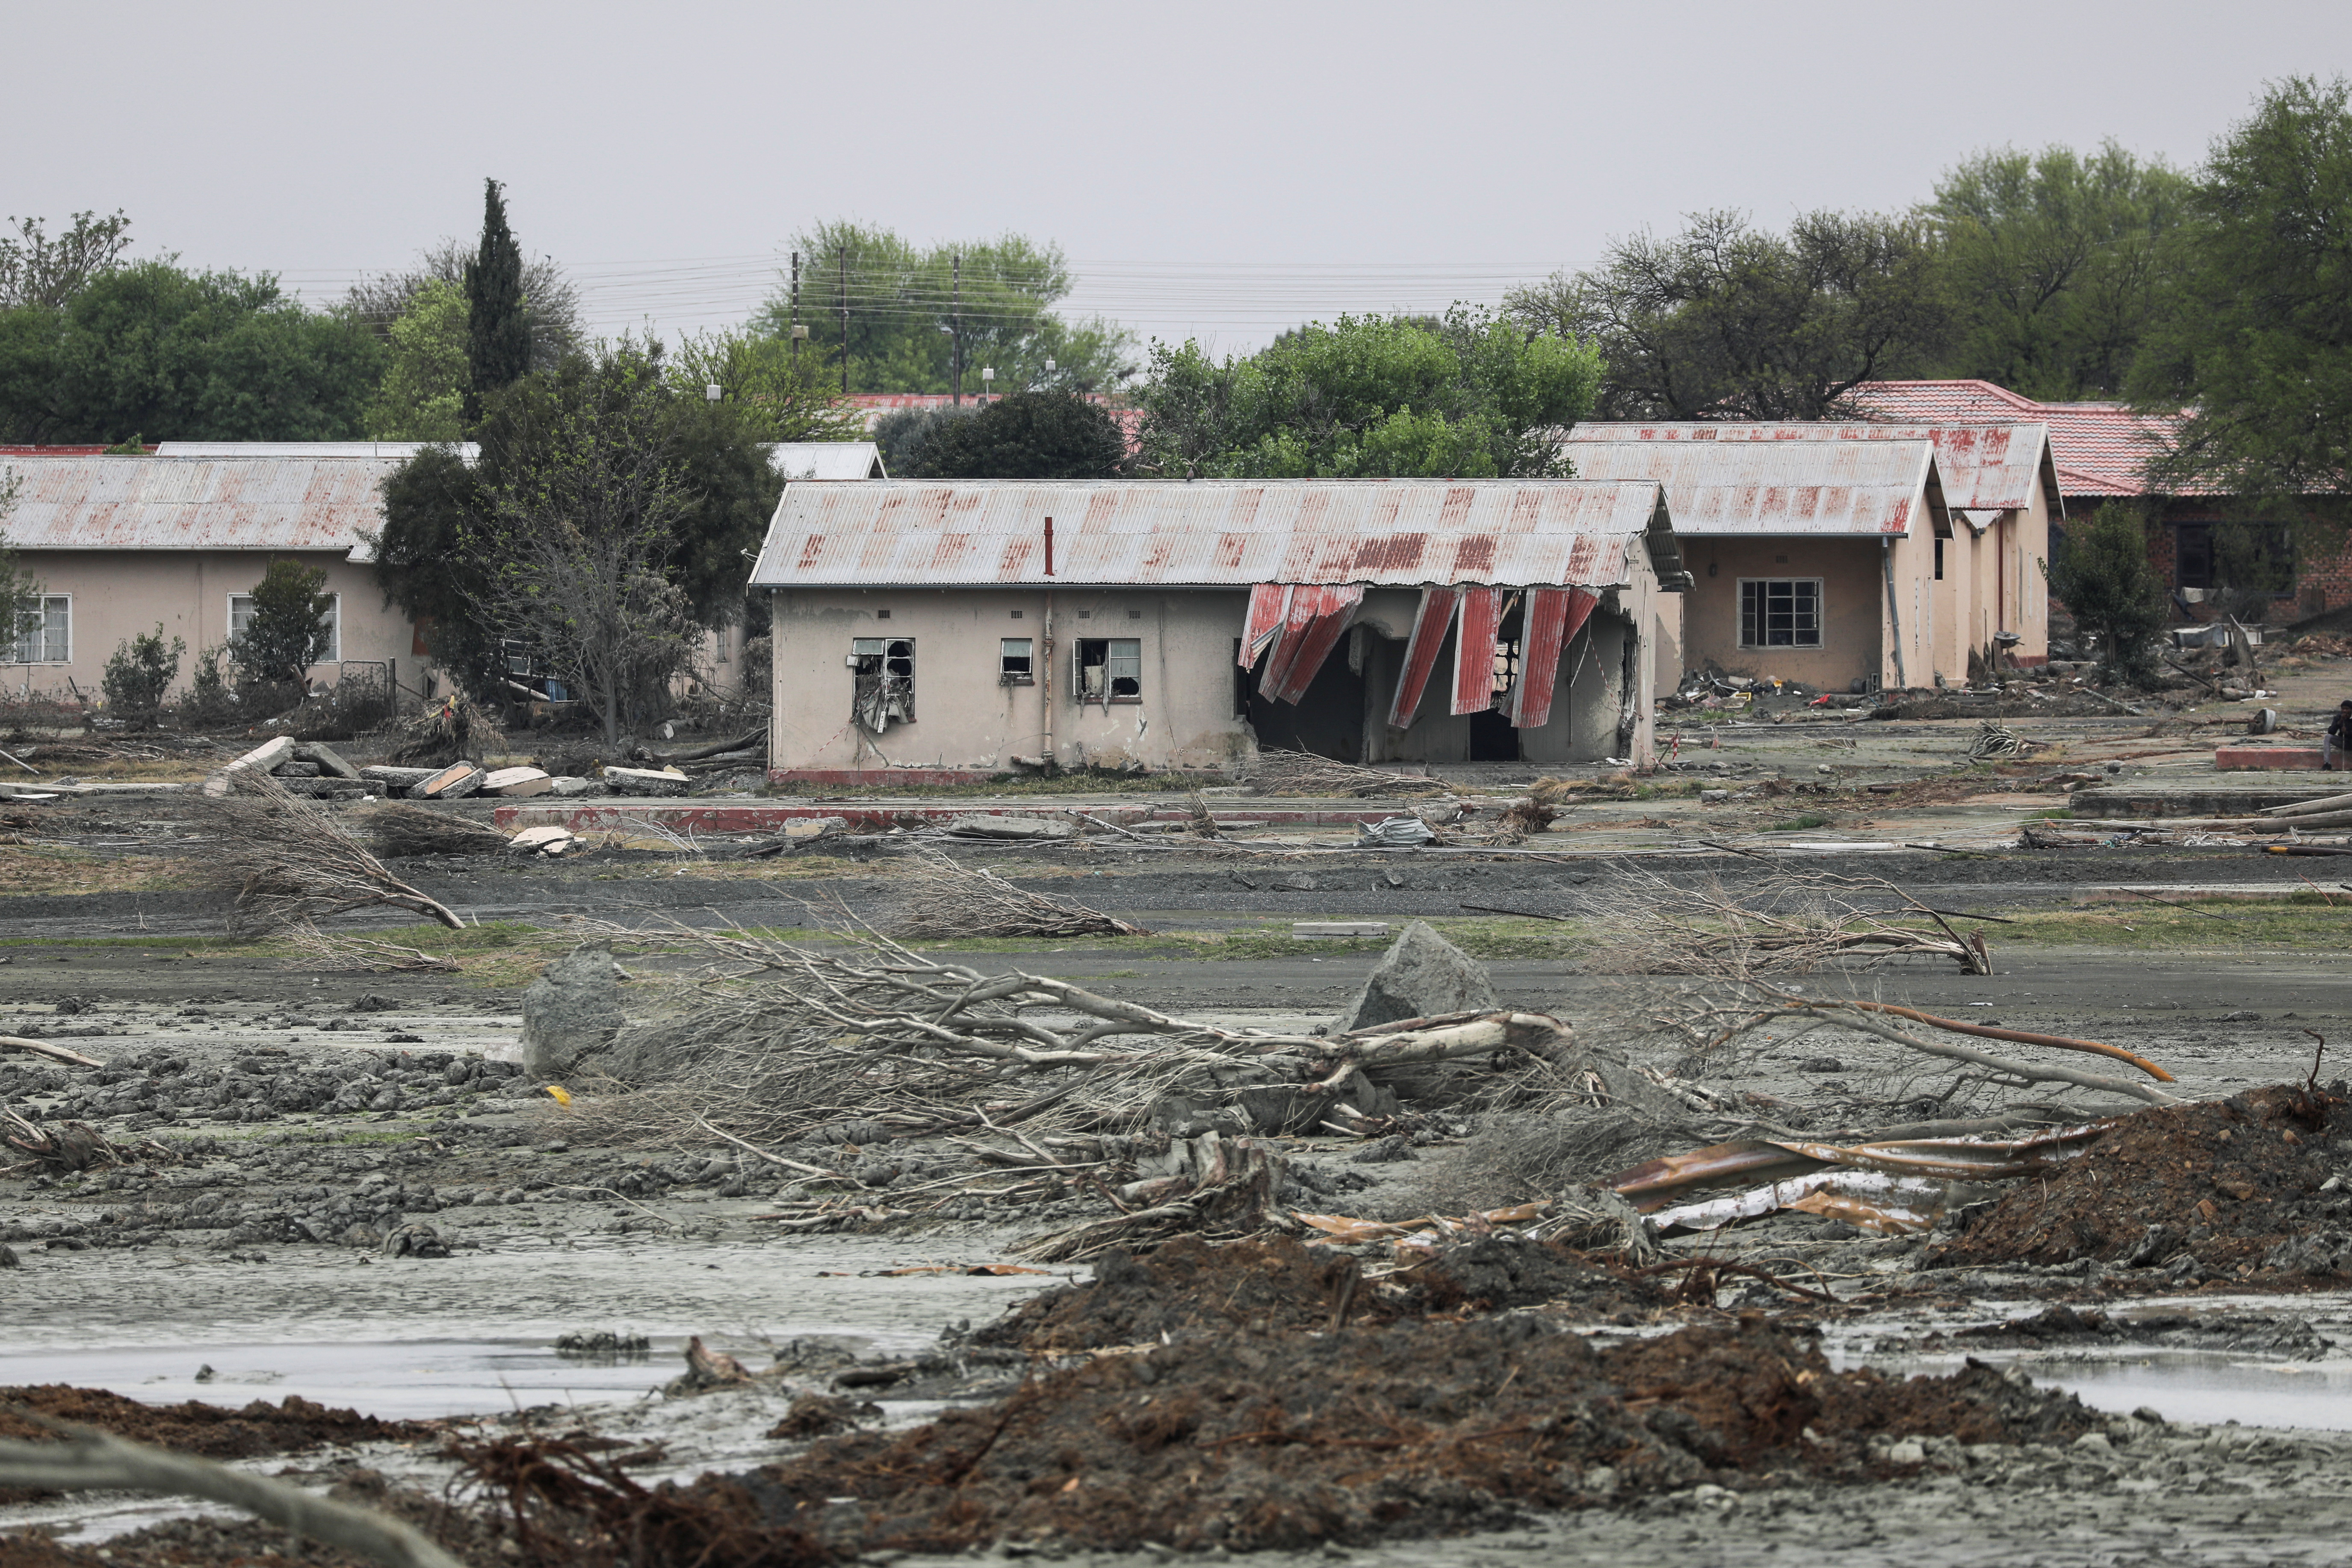 Houses that were destroyed by sludge when the Jagersfontein diamond tailings dam wall collapsed on September 11, in Jagersfontein in the Free State province